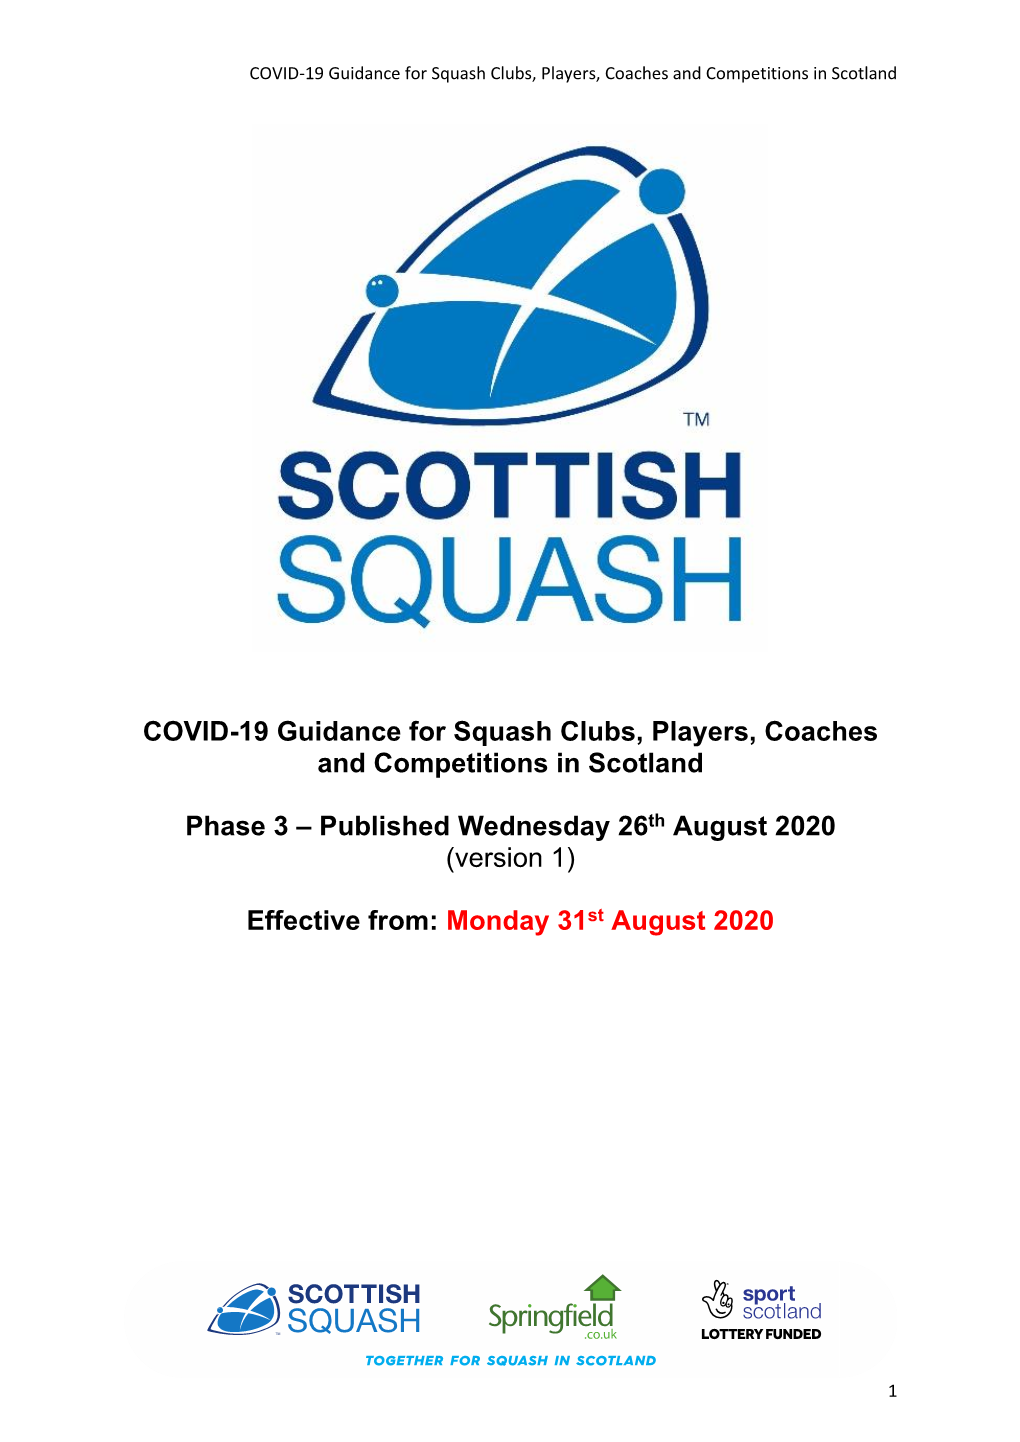 COVID-19 Guidance for Squash Clubs, Players, Coaches and Competitions in Scotland